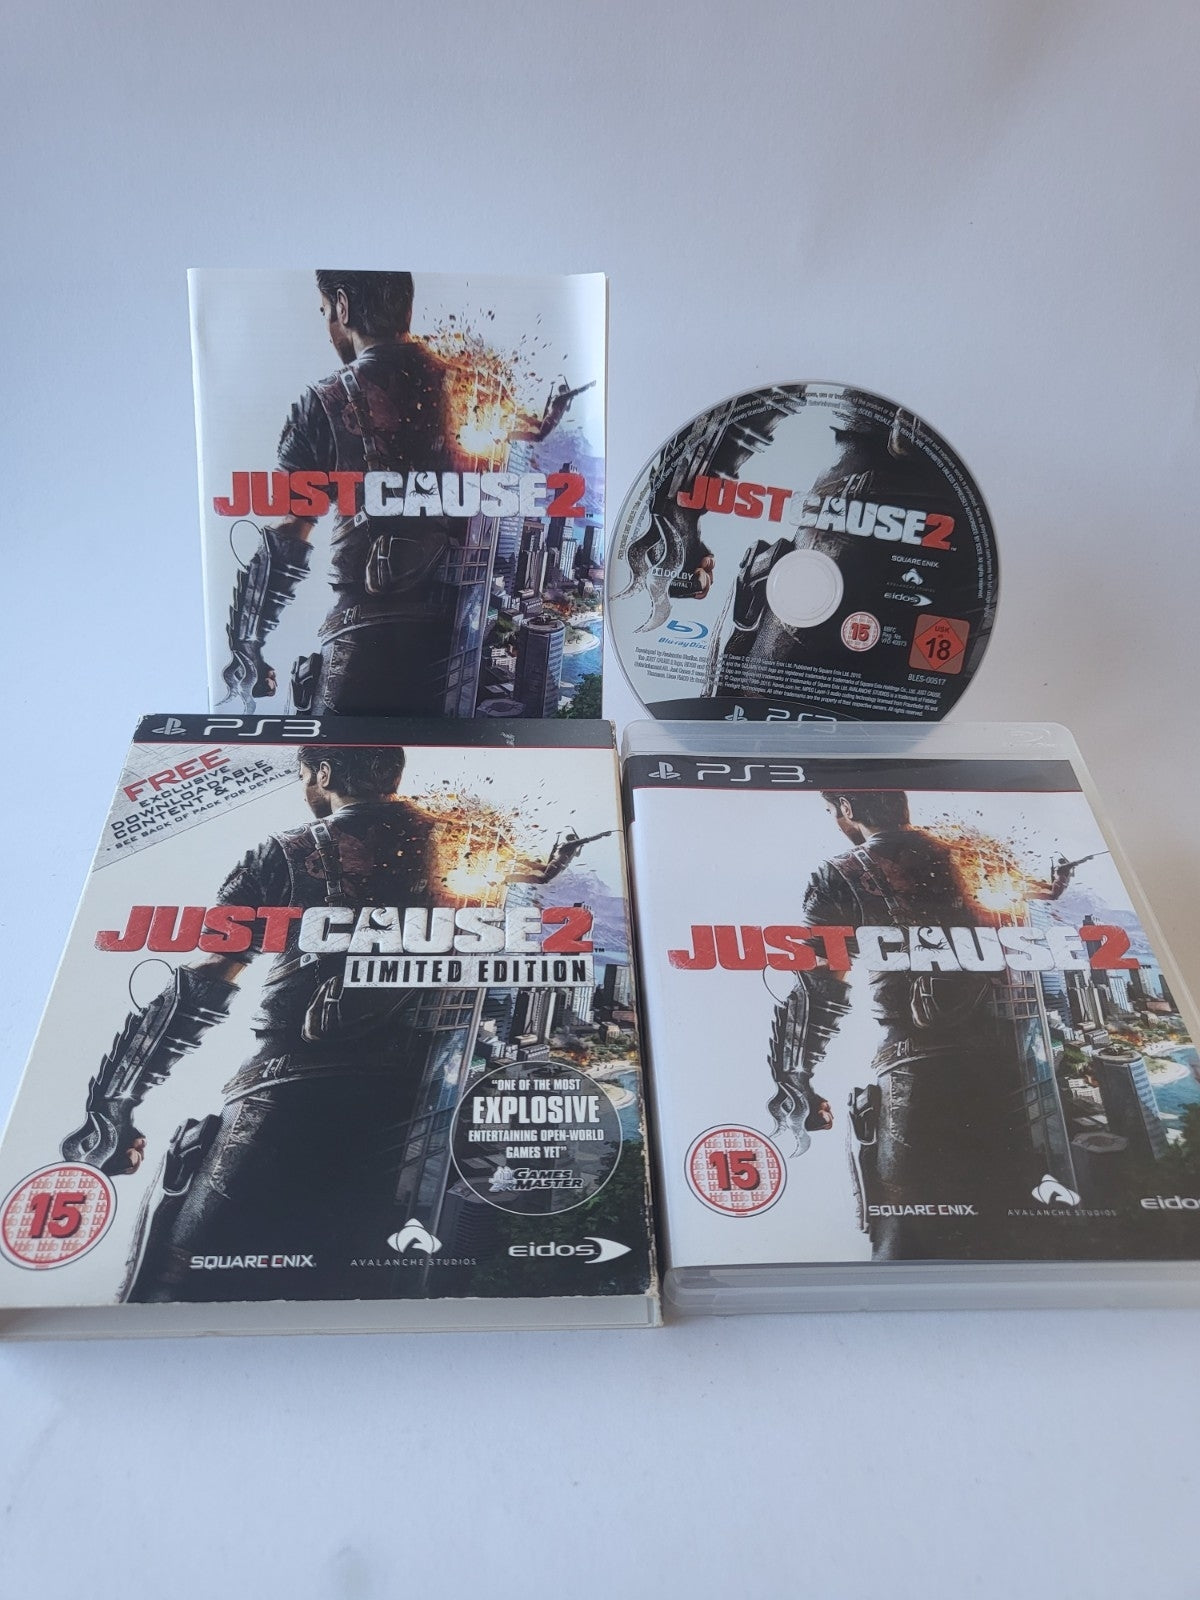 Just Cause 2 Limited Edition Playstation 3